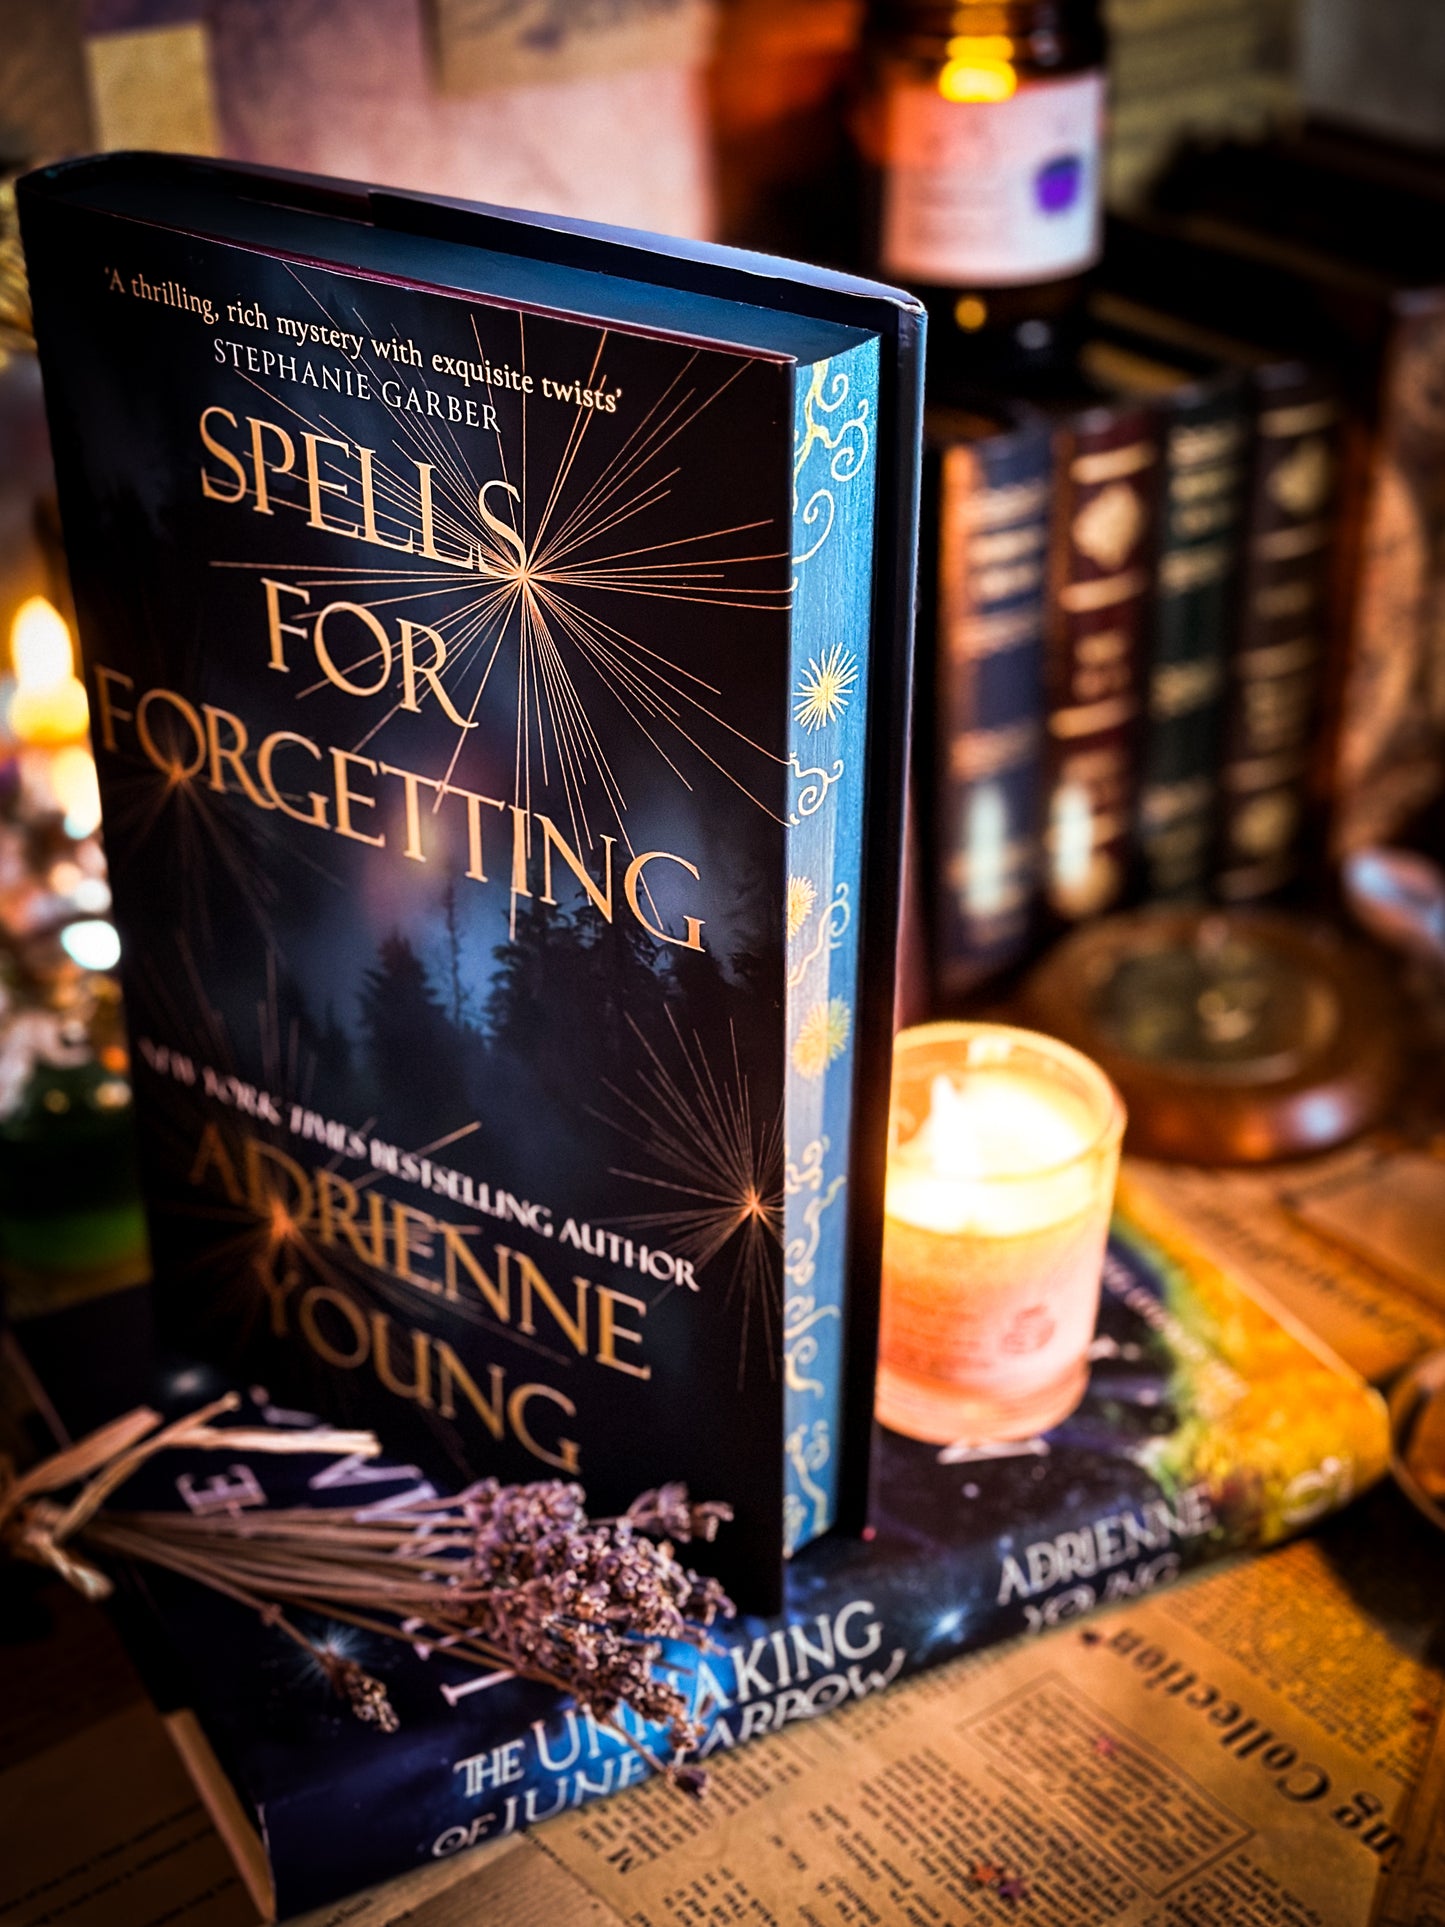 Spells for Forgetting HANDPAINTED BOOK EDGES